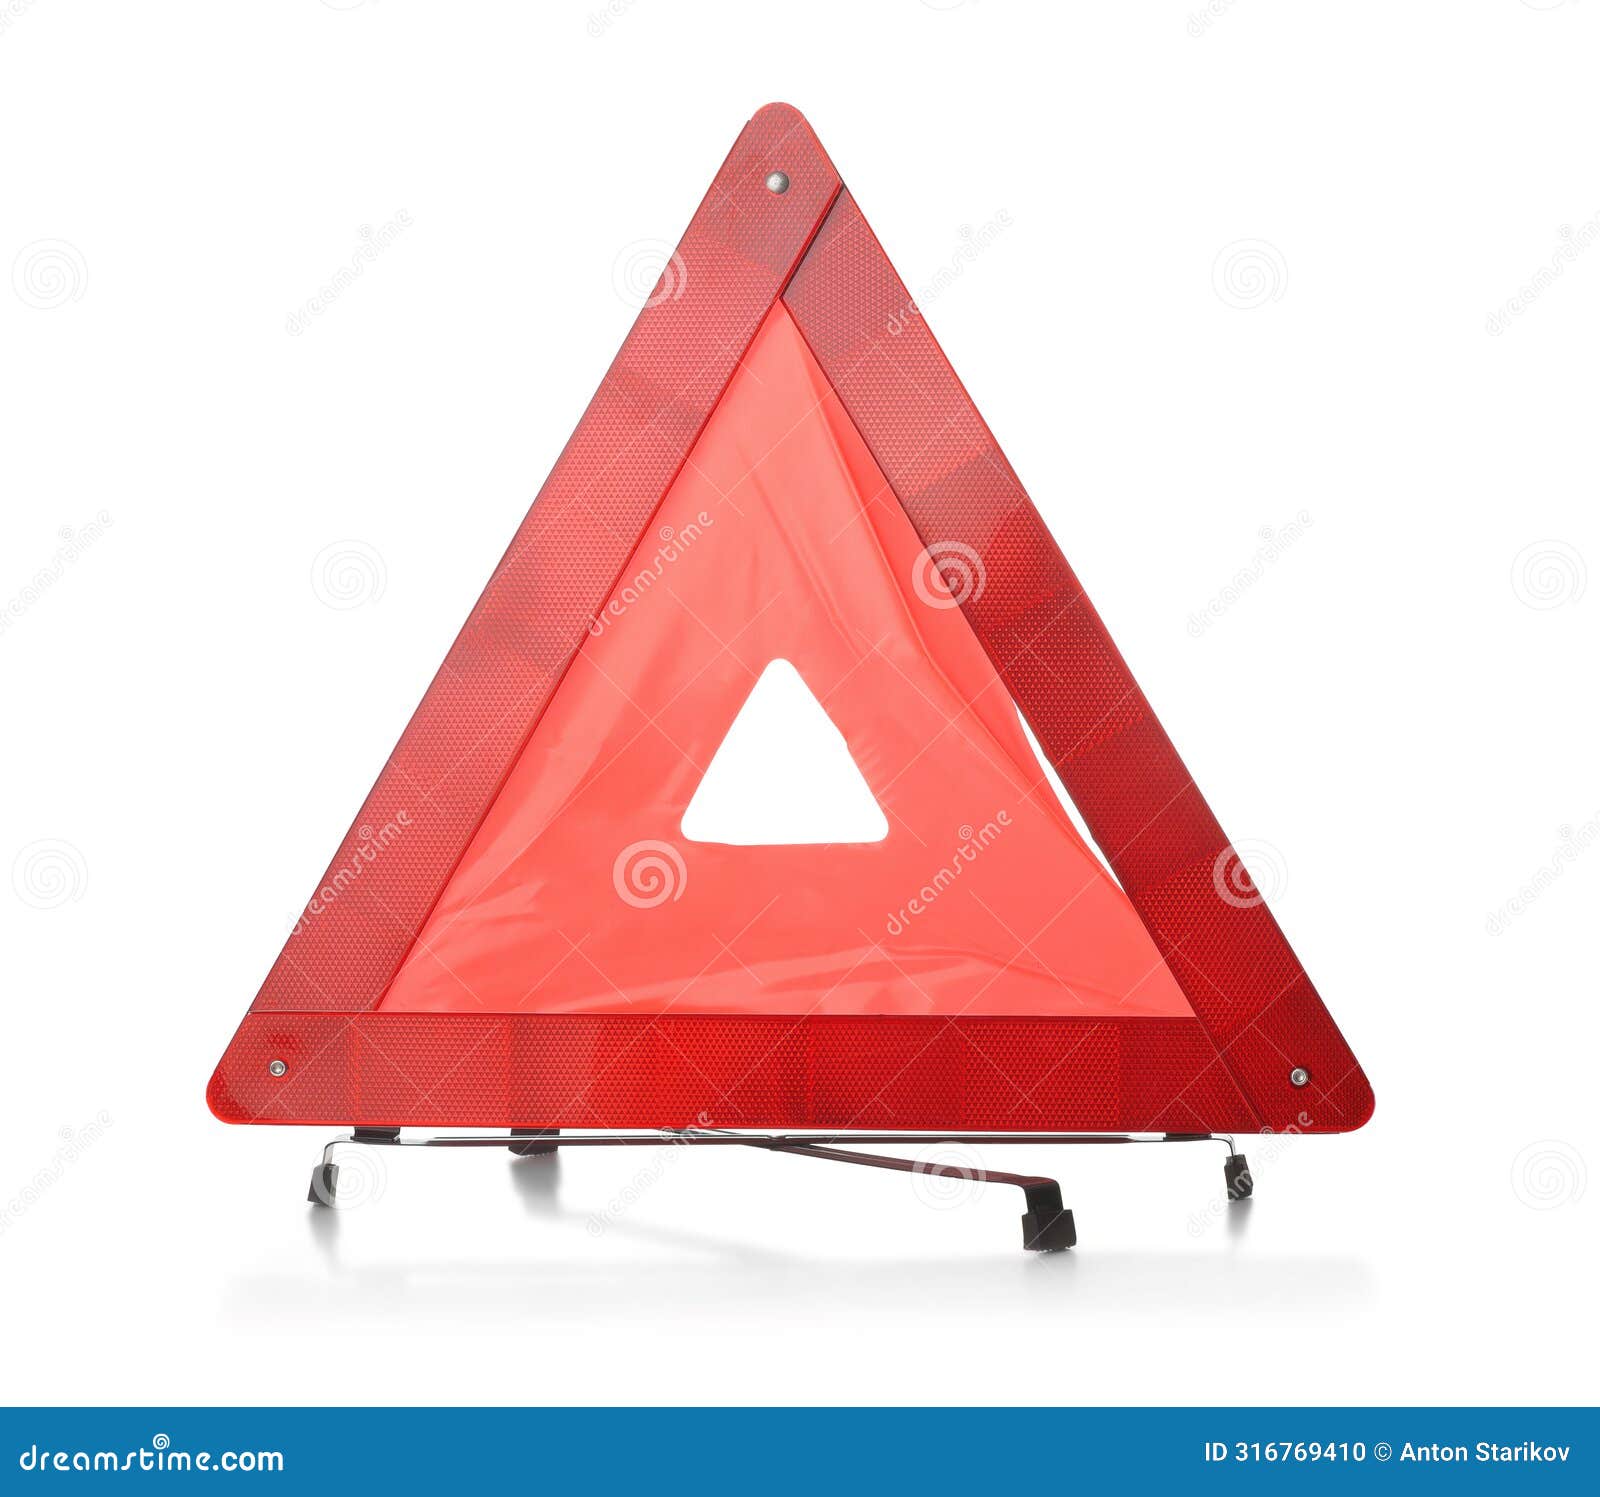 red reflective traffic warning triangle